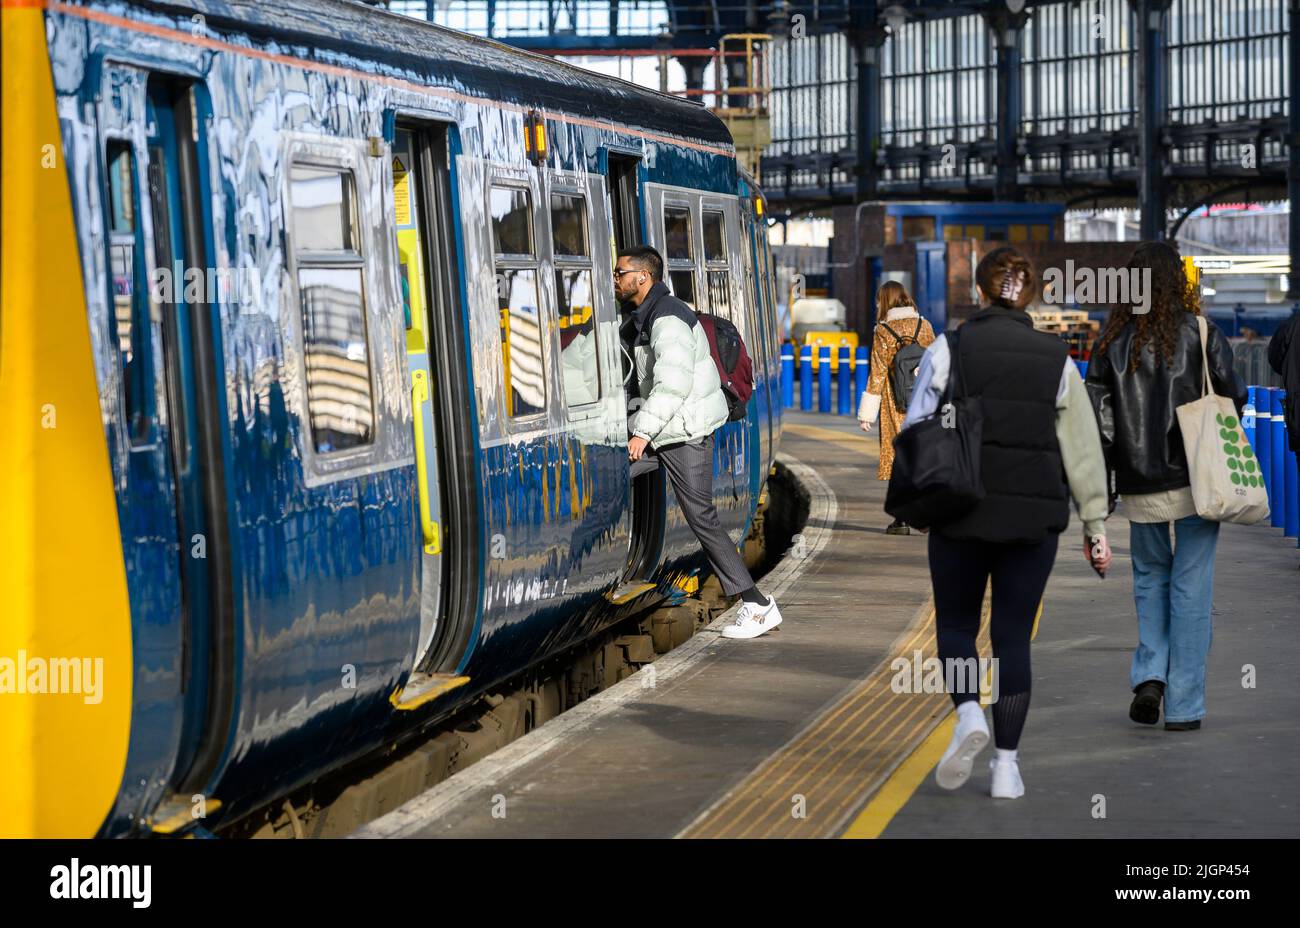 Passengers boarding a British Rail class 313 train in Southern livery, Brighton Railway Station, England. Stock Photo